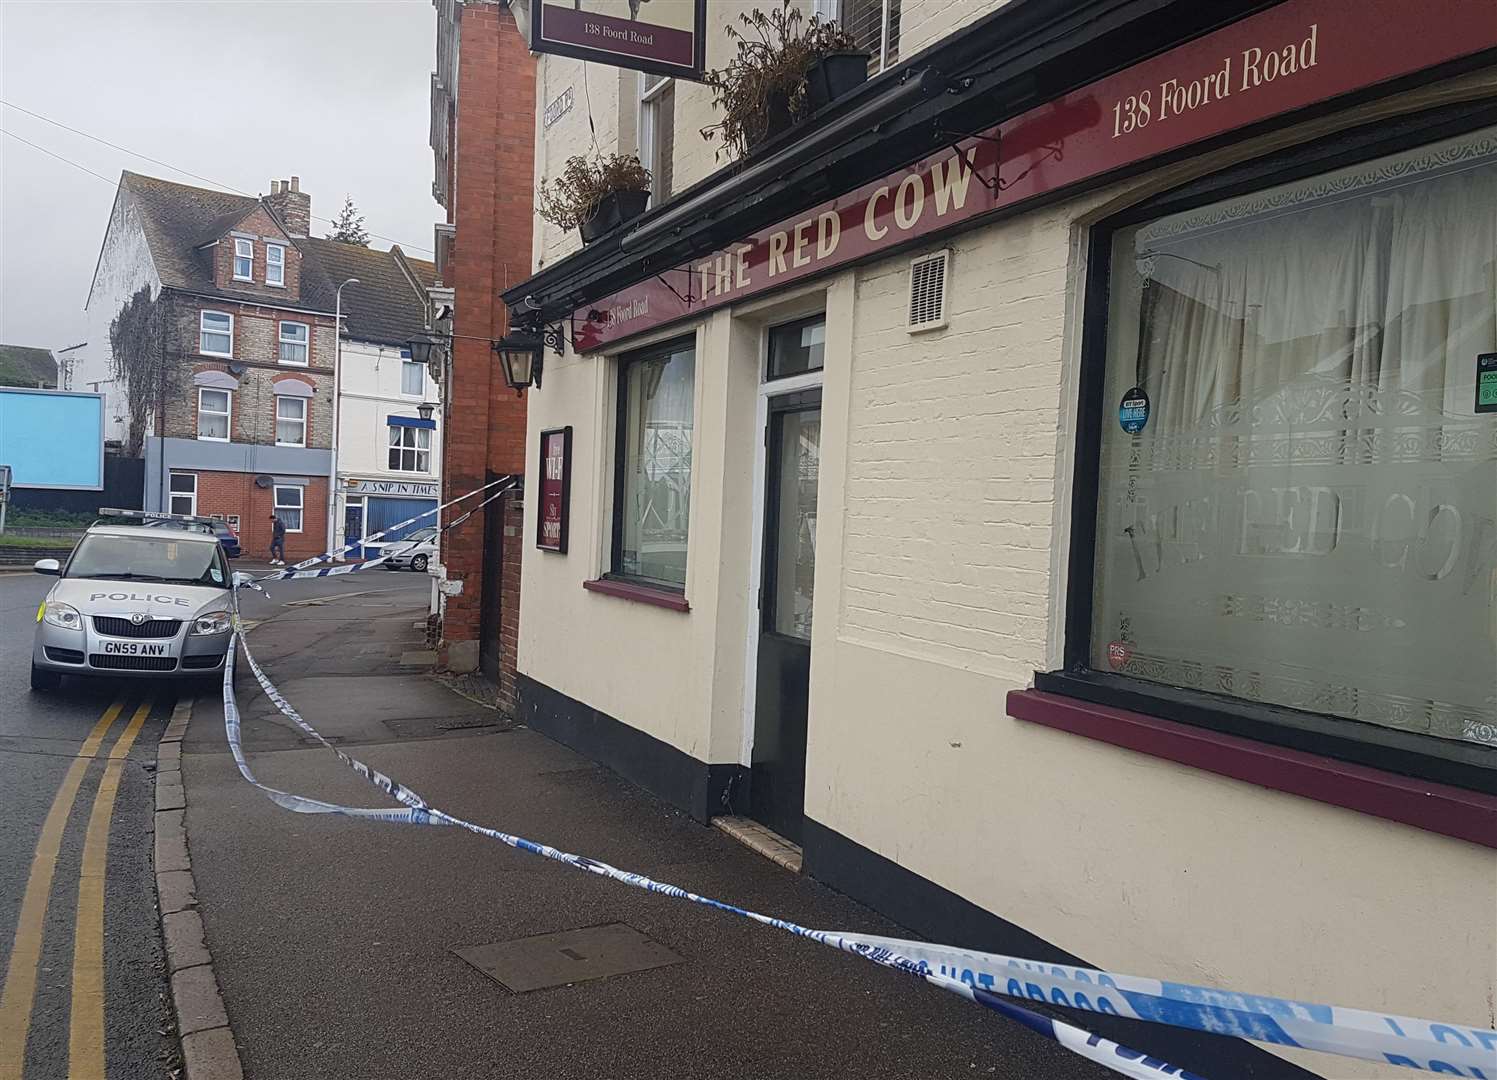 Joe Daniels is thought to have been shot dead at his pub in Folkestone